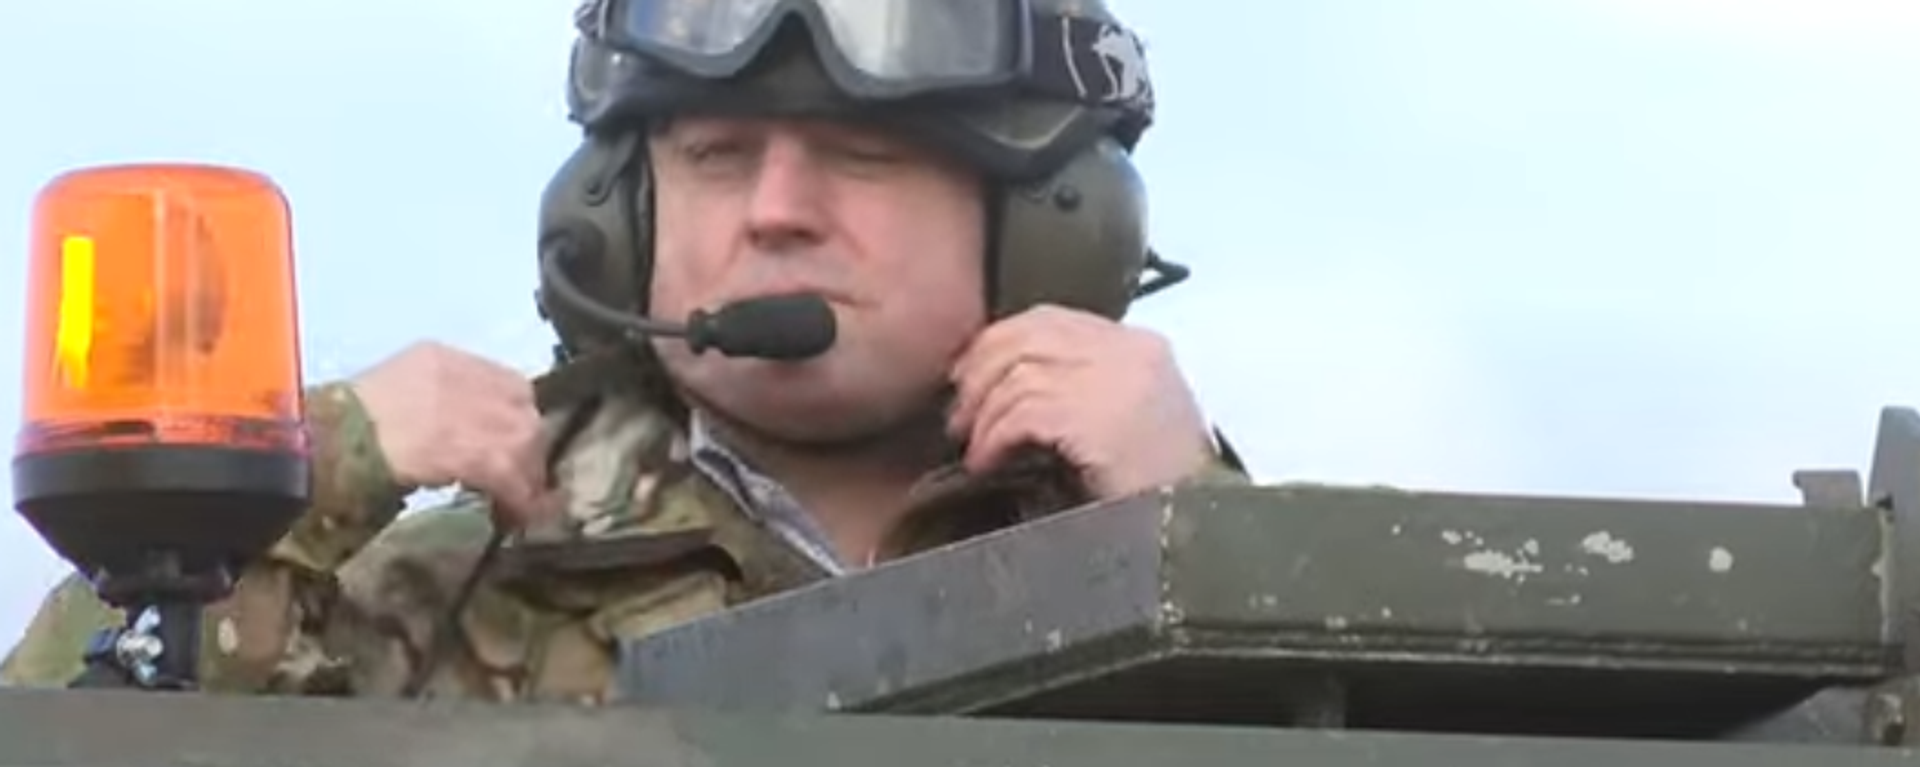 UK Defense Chief Ben Wallace at a photo op visit to a military training camp where Ukrainian tankers are training to use Challenger 2 main battle tanks. Screengrab of Telegraph video. - Sputnik International, 1920, 23.02.2023